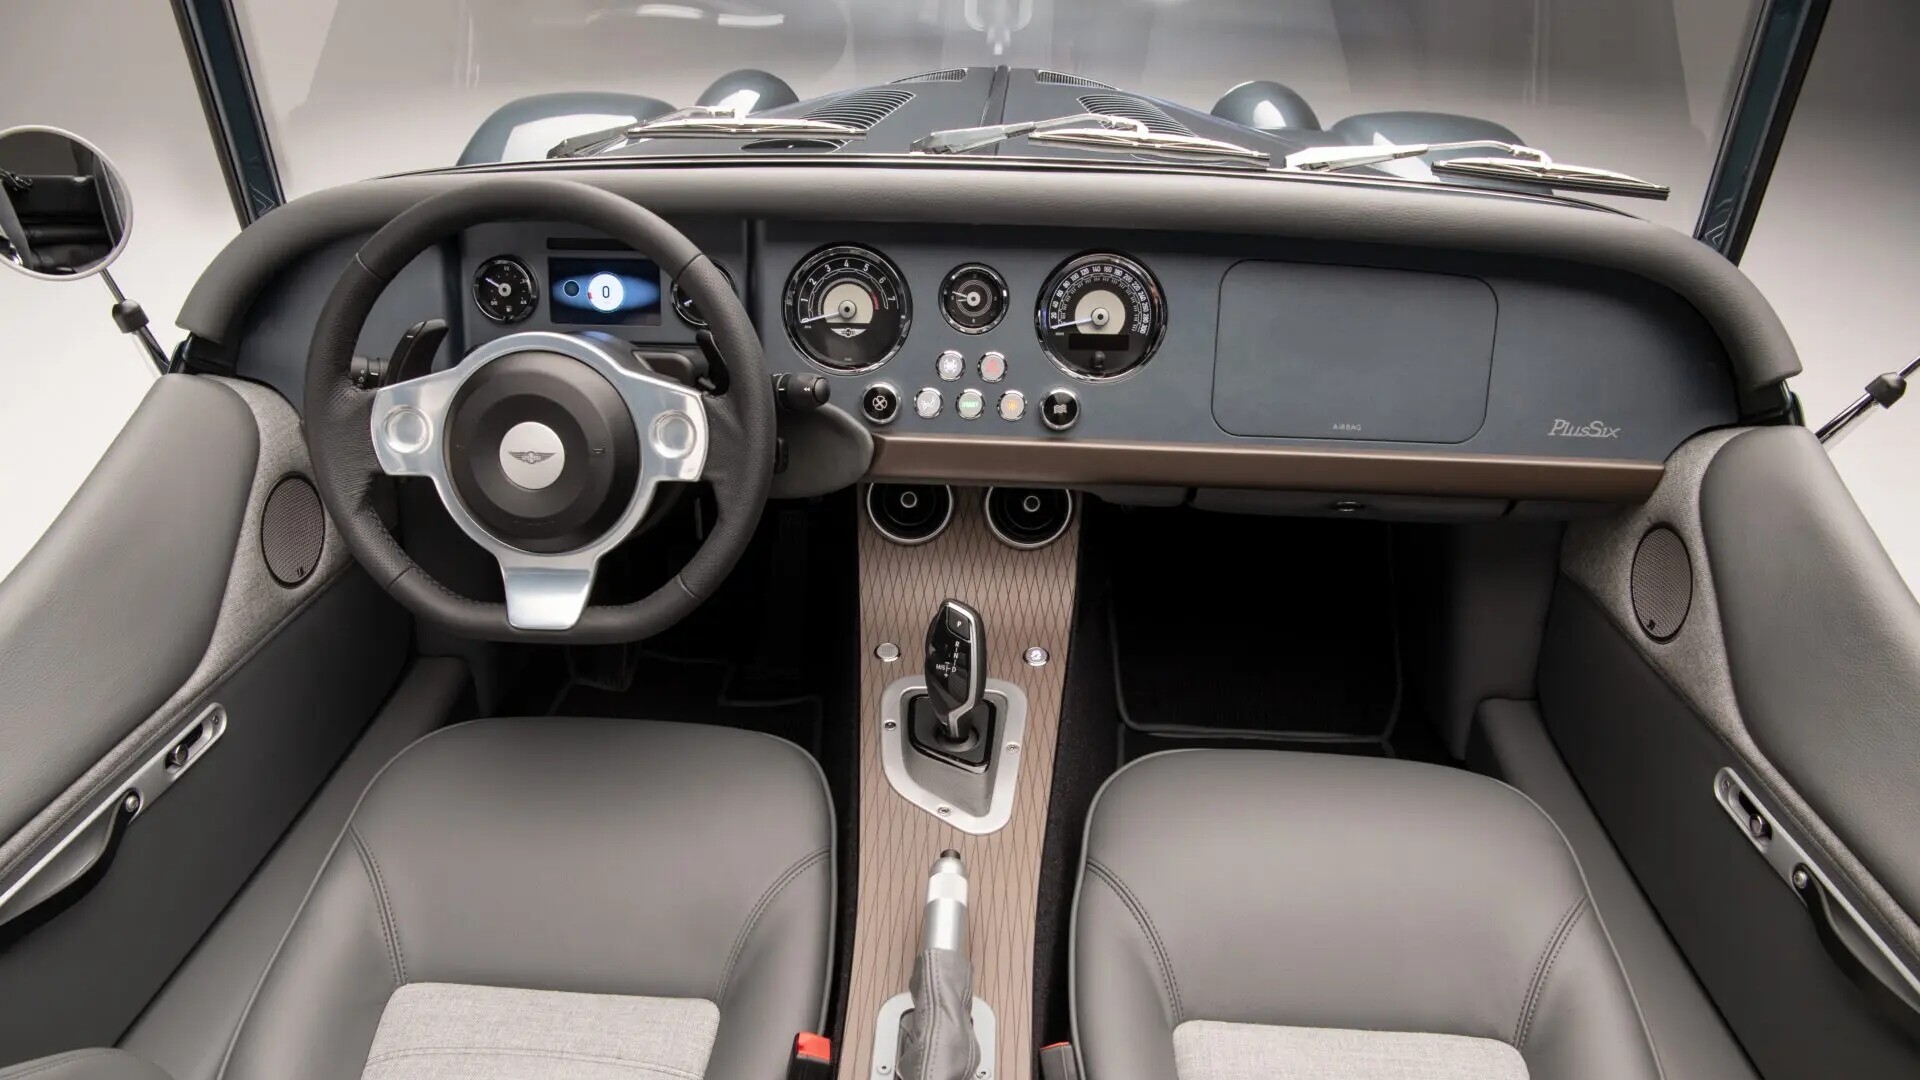 The Interior, Steering, Dashboard, And Central Console Of A Morgan Plus Six (Credits Morgan Motor Company)